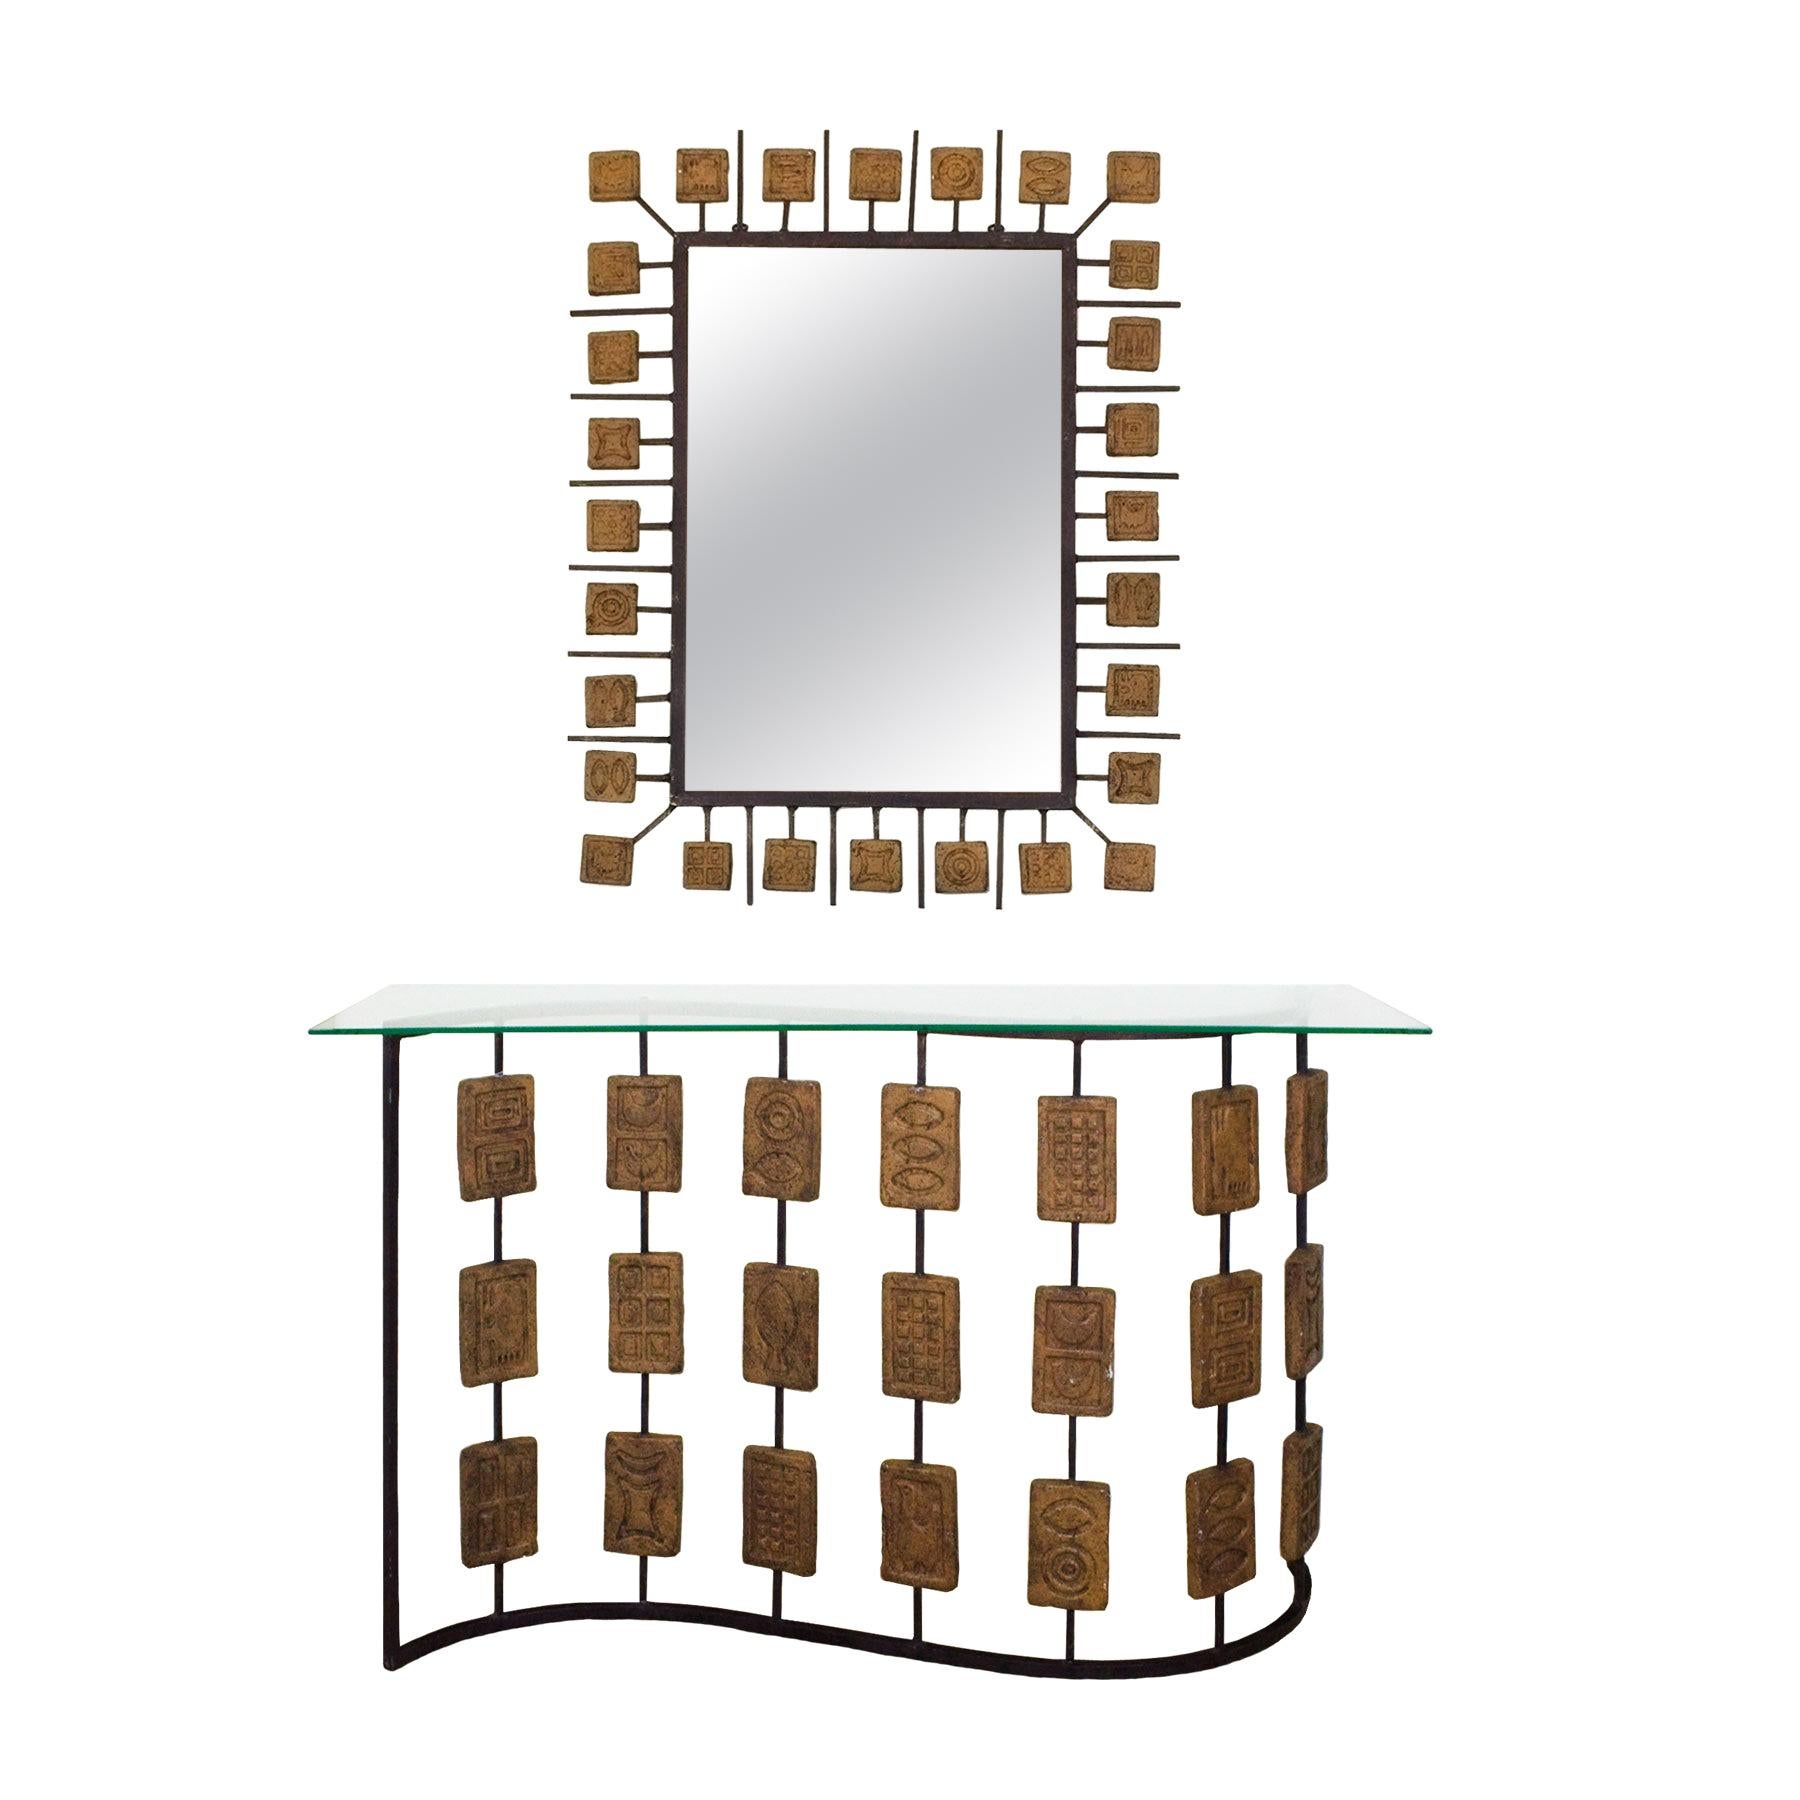 1970s Console and Mirror by Mario Giani "Clizia", Steel, Terracotta, Italy